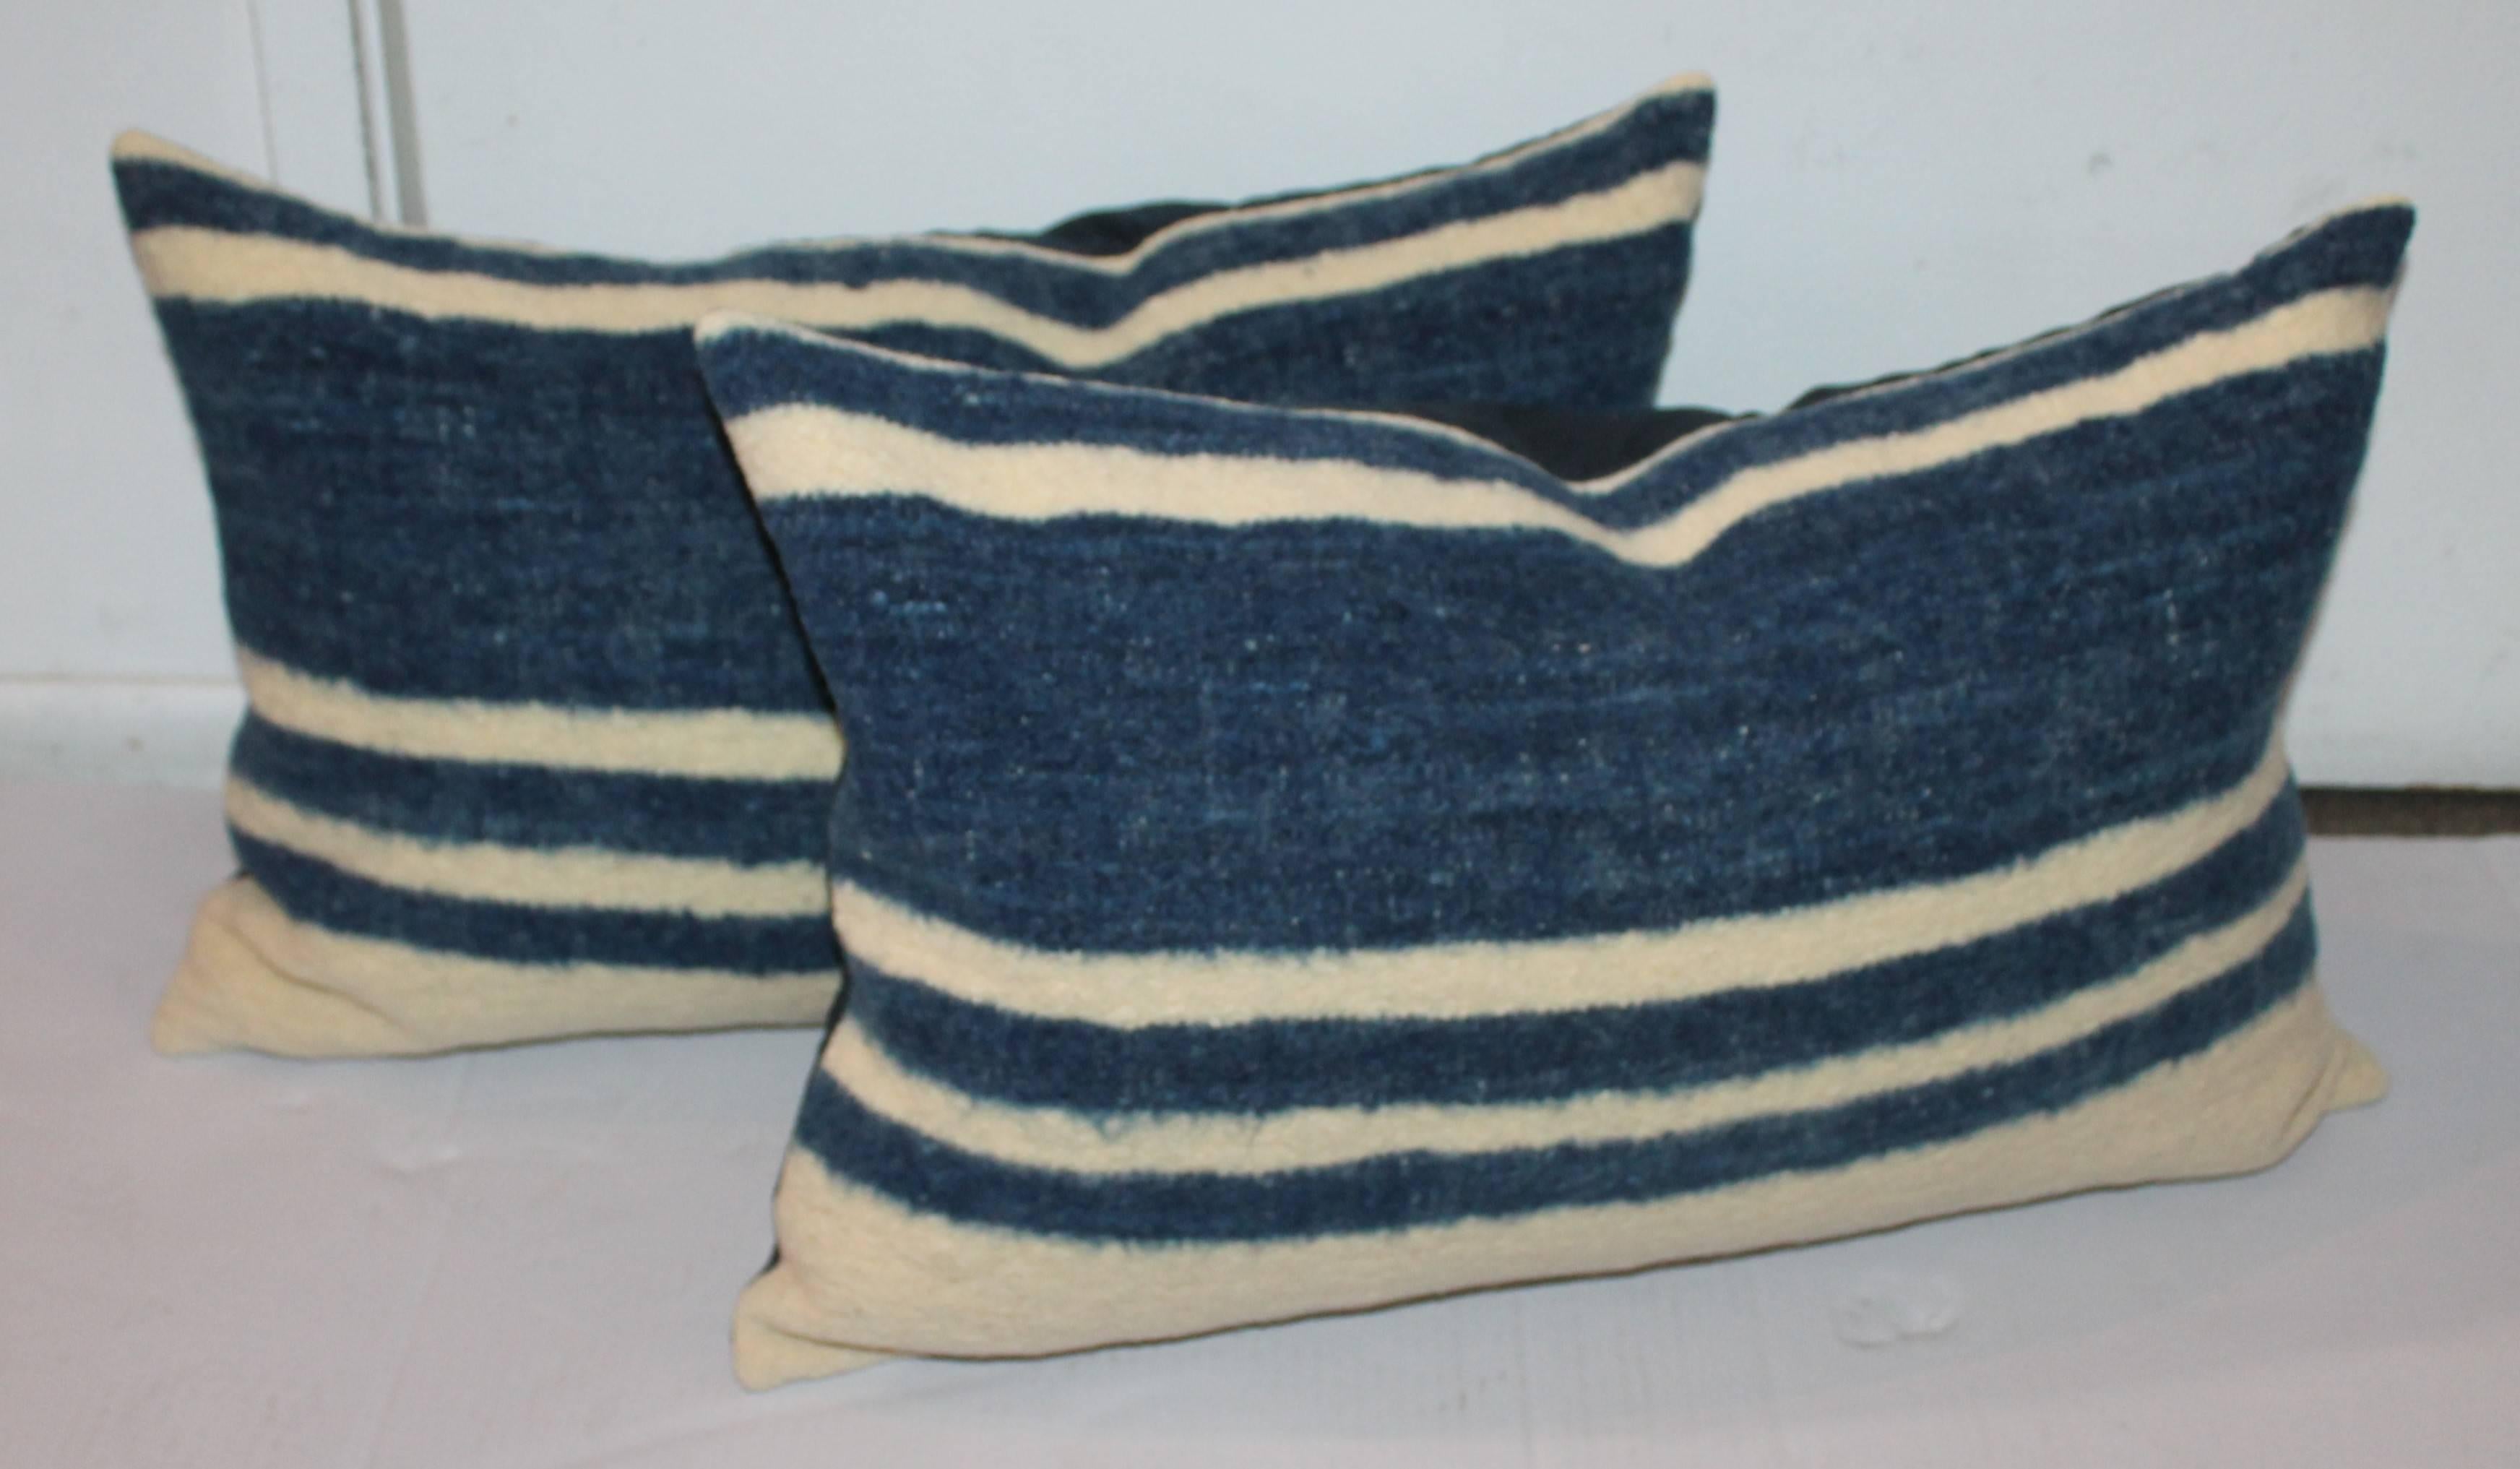 These hand woven Mexican weaving bolster pillows are in great condition. Sold in pairs. The backings are in blue cotton linen. Sold as a group collection of four pillows.